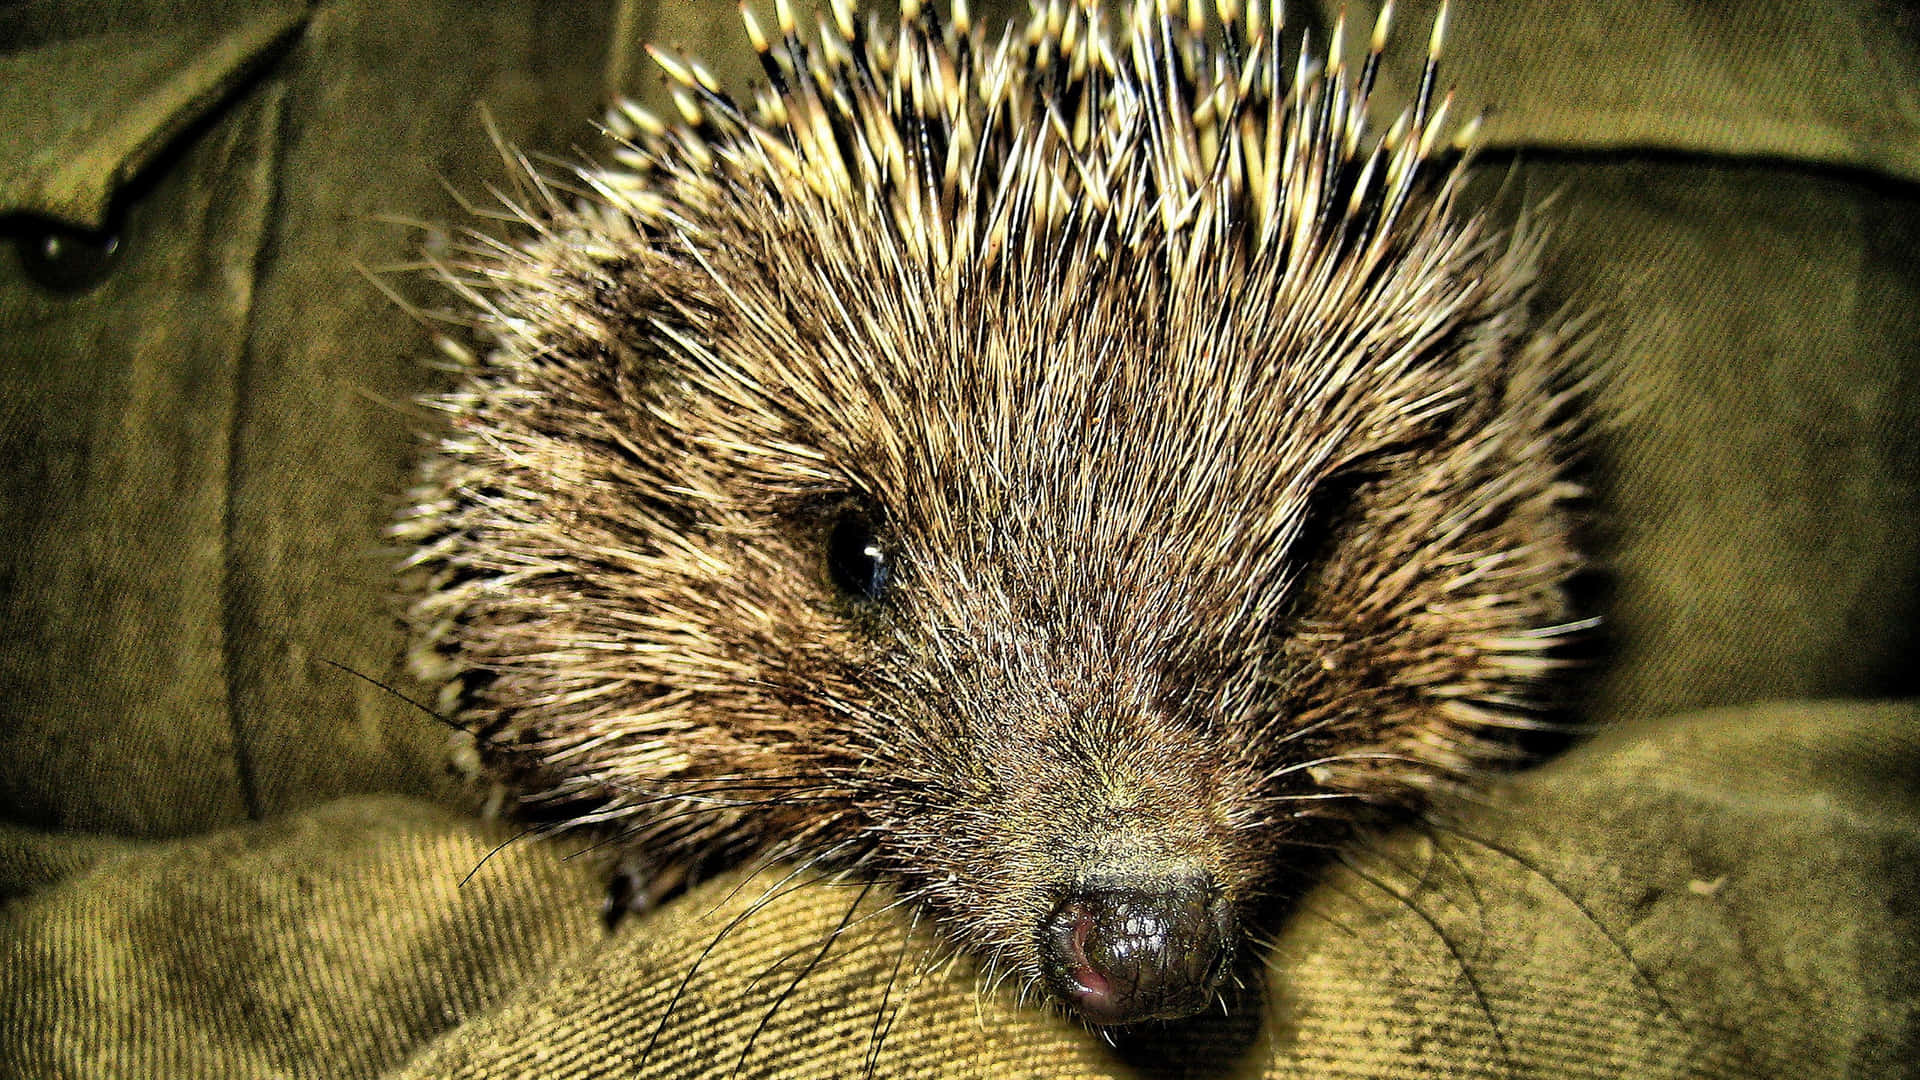 Cute Hedgehog Brown Aesthetic Close-up Picture